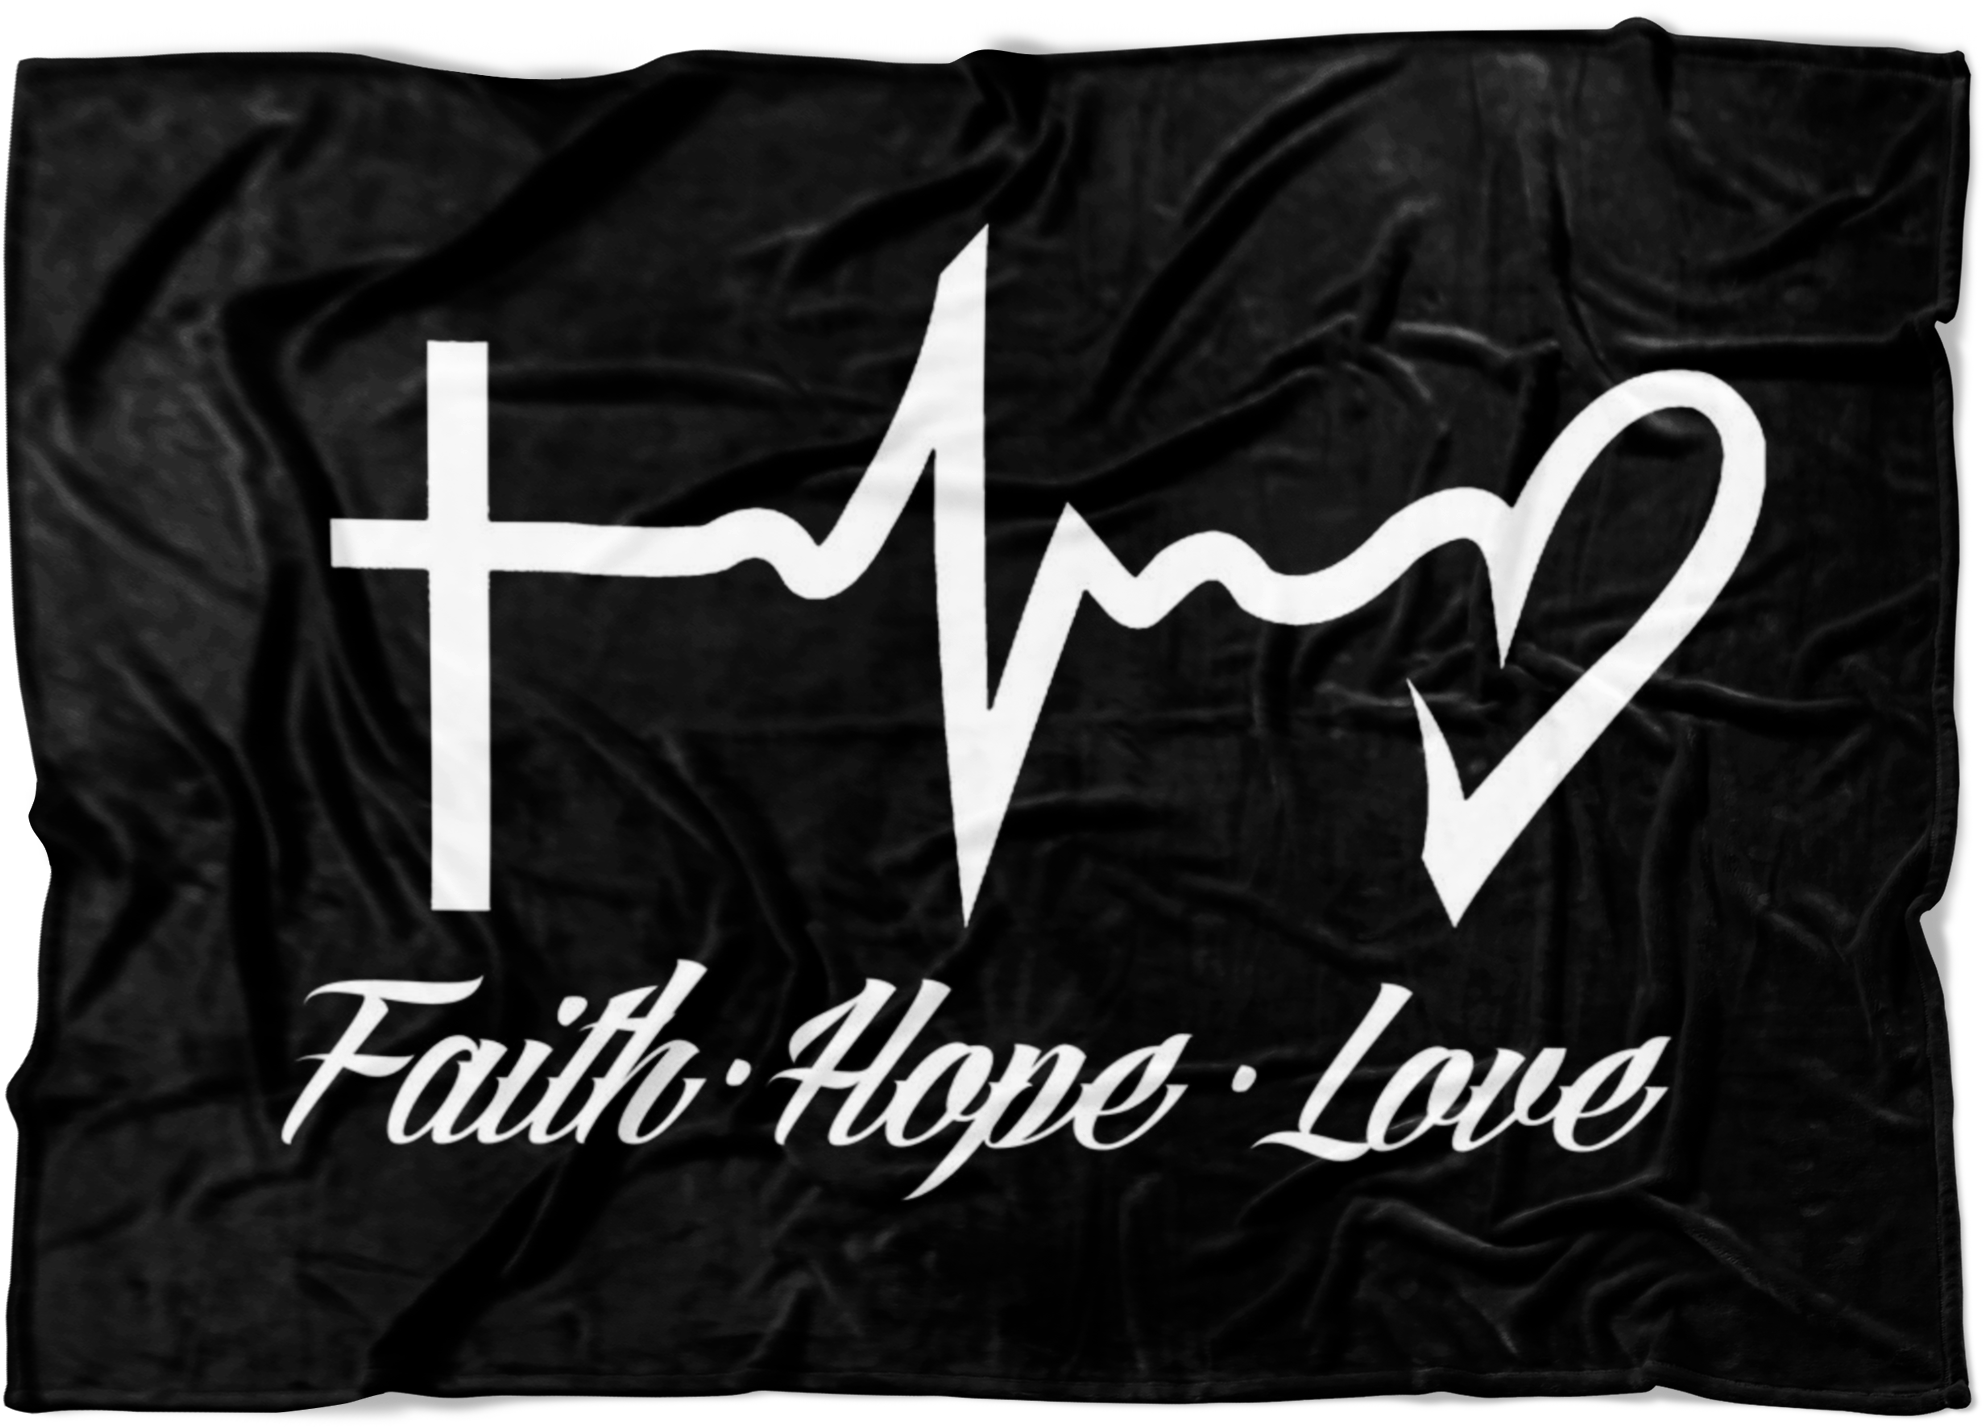 A Black Blanket With White Text And A Cross And Heart